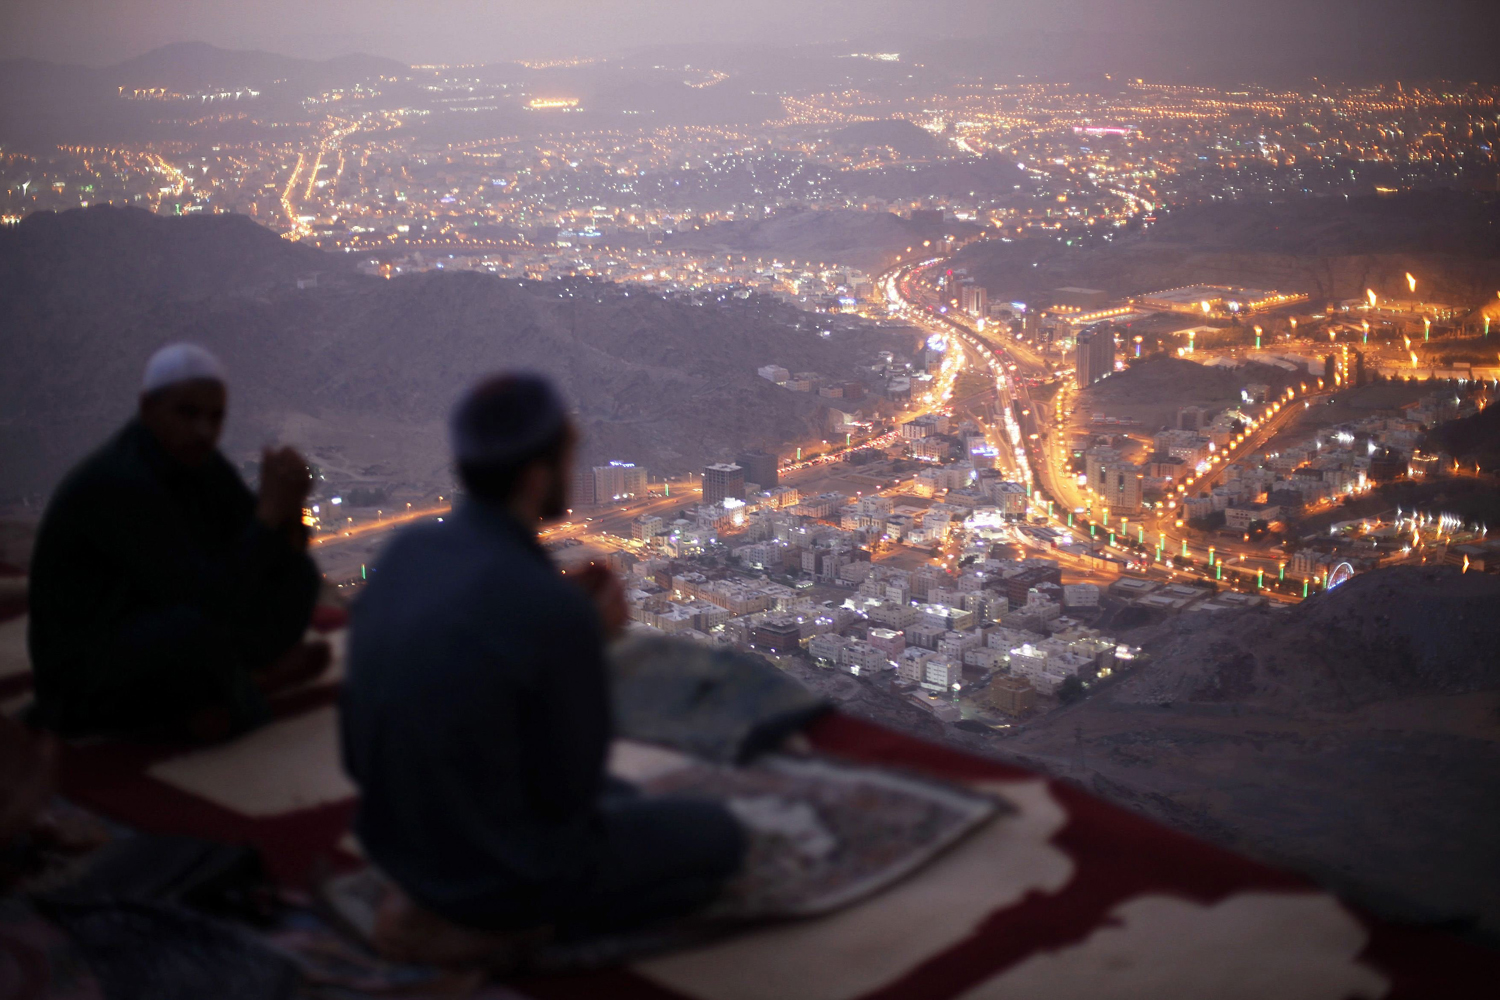 Muslim pilgrims pray atop Mount Thor in the holy city of Mecca ahead of the annual haj pilgrimage